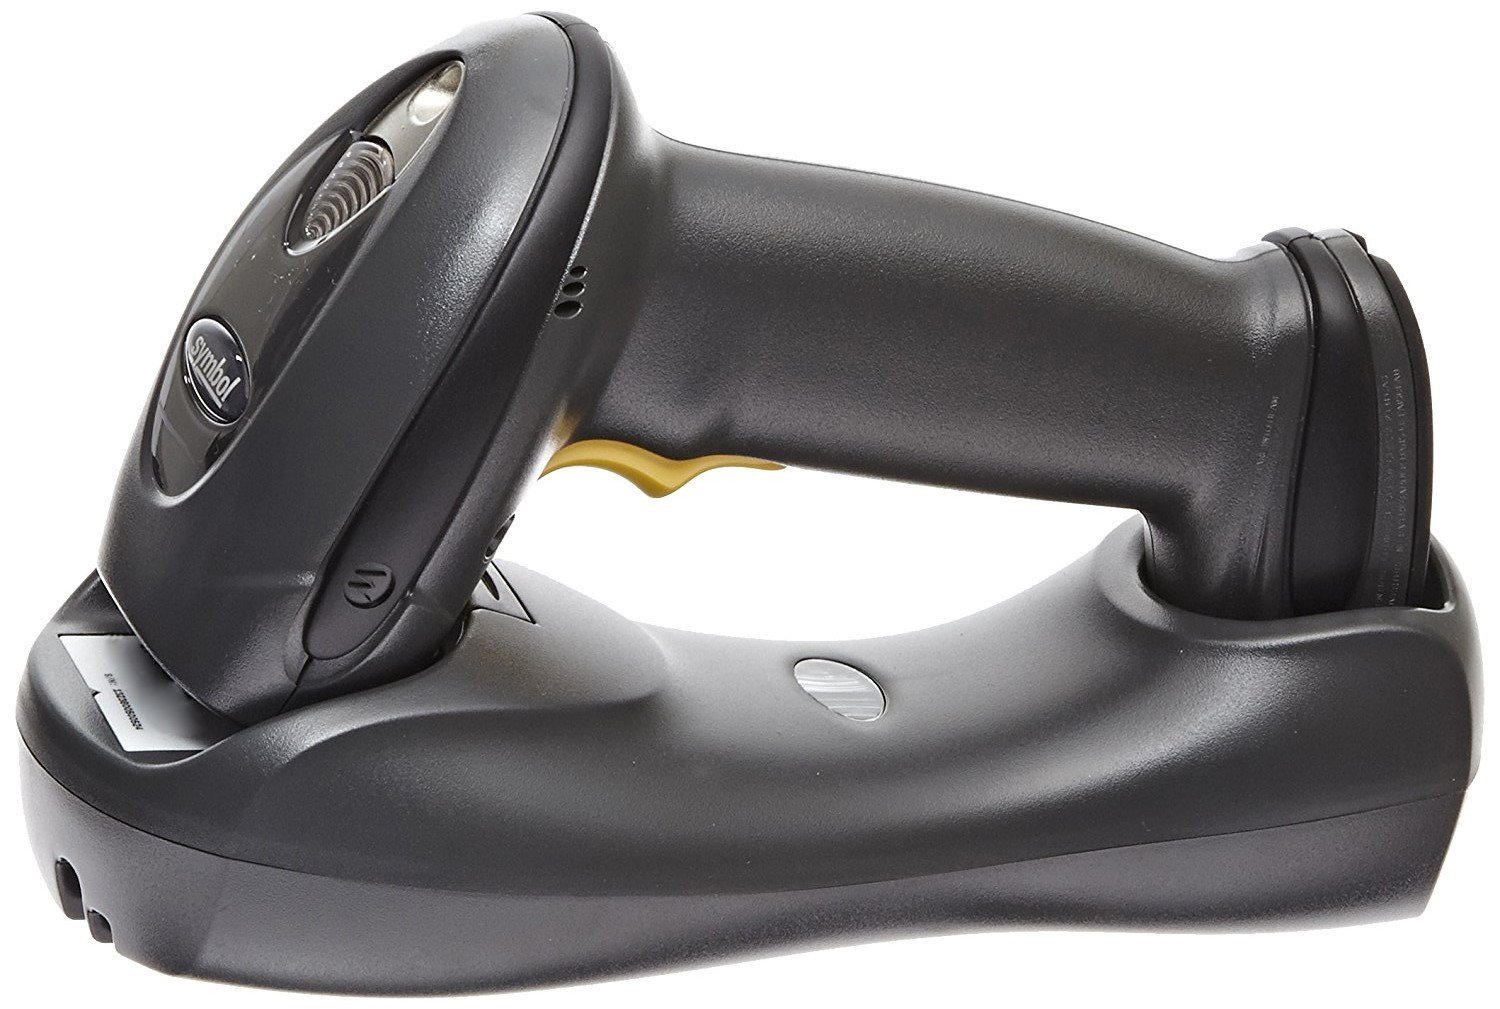 Motorola Symbol DS6878 Bluetooth Barcode Scanner without cradle